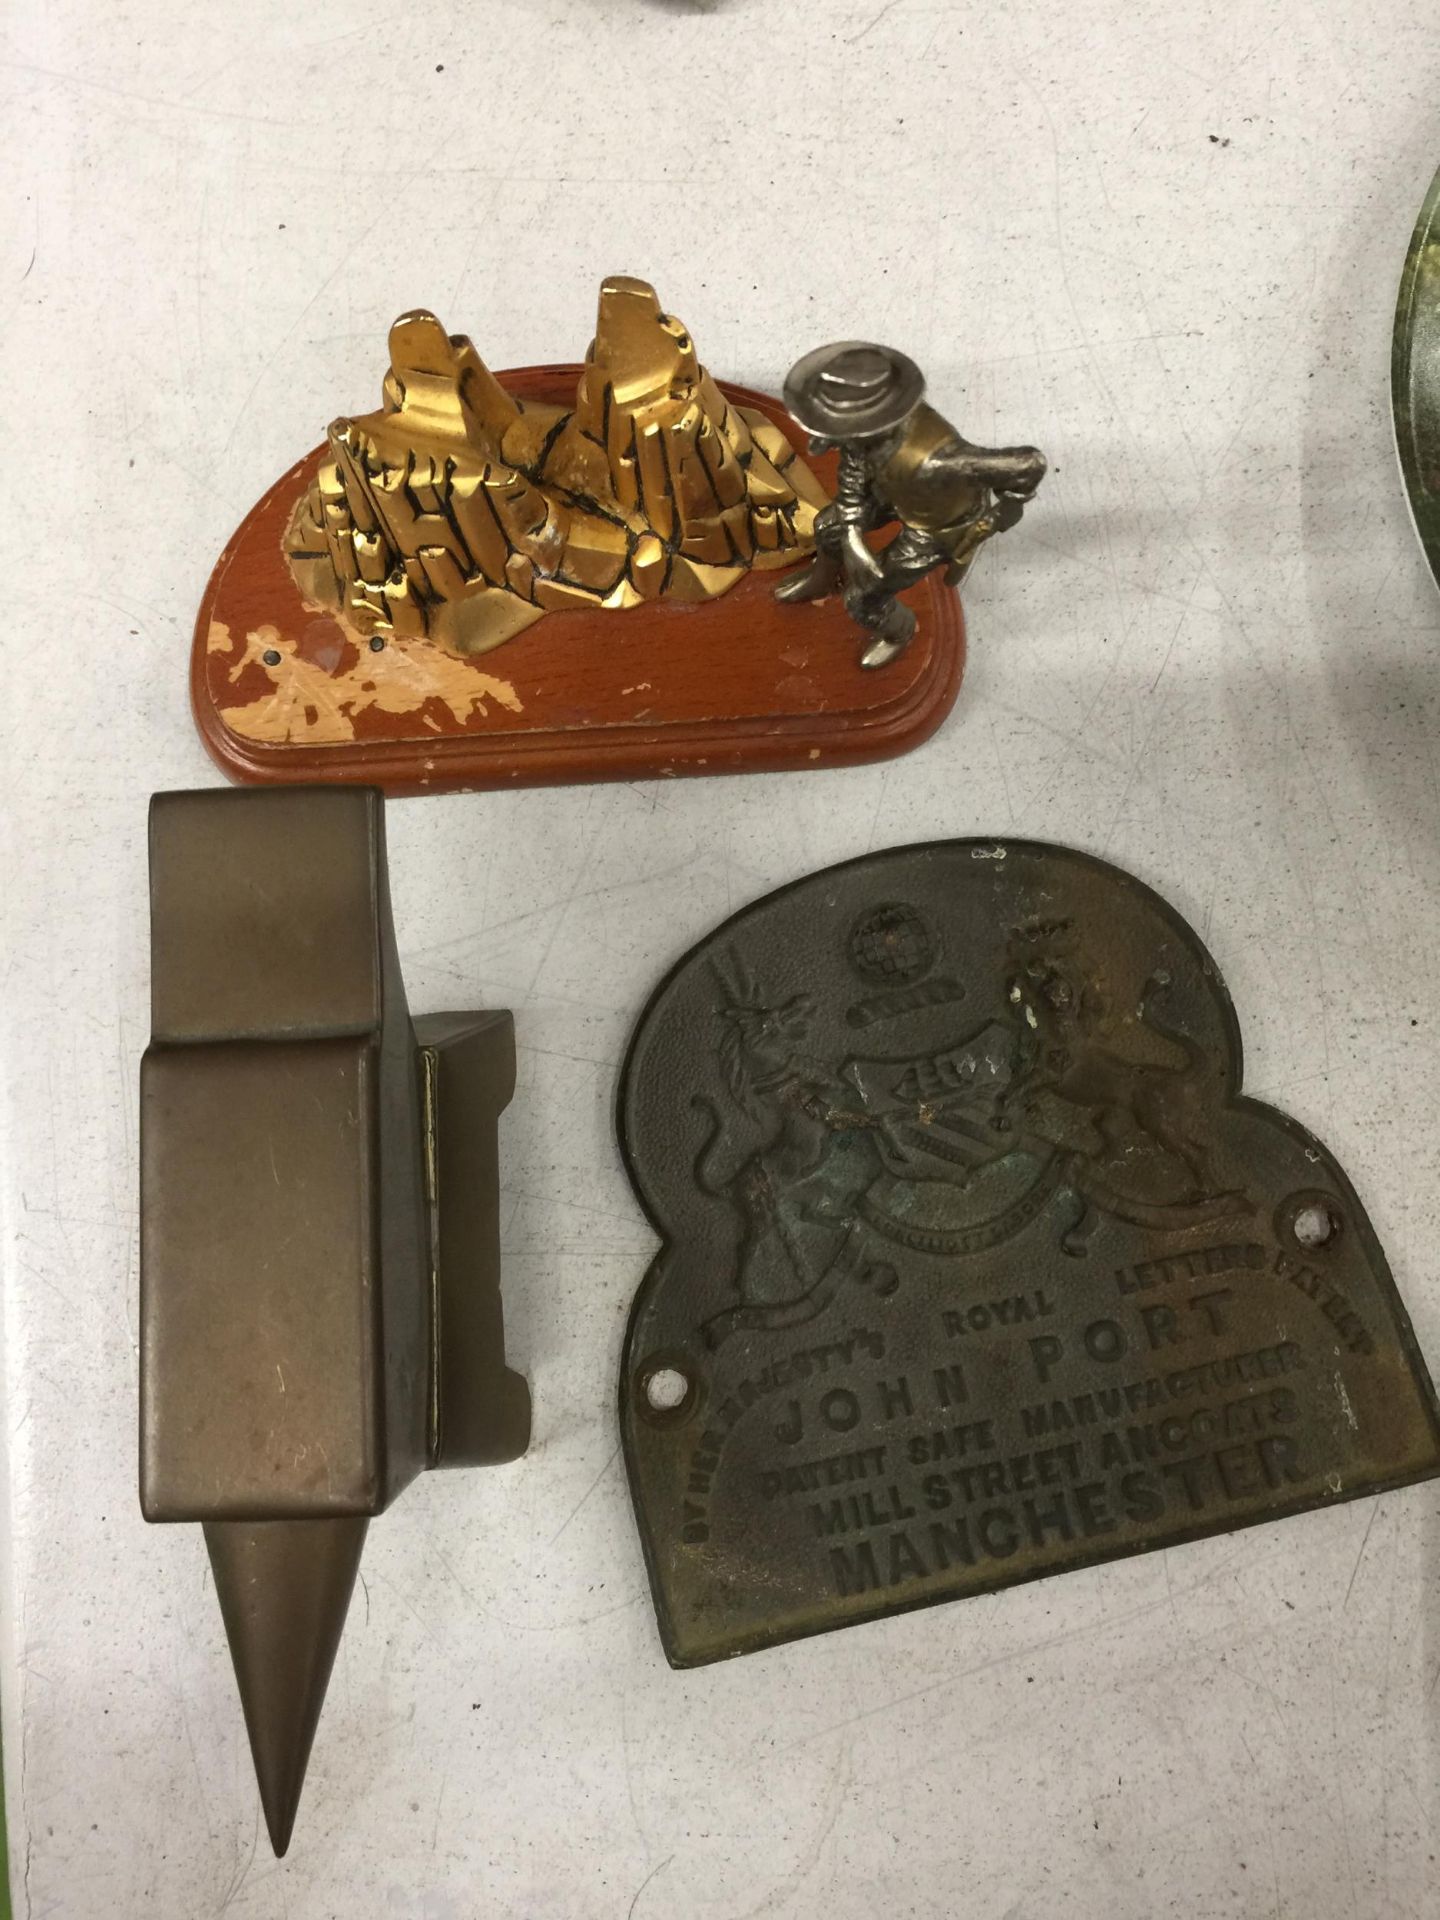 A SMALL ANVIL, 'COWBOY' POCKET WATCH STAND AND A CAST 'JOHN PORT, MANCHESTER' SAFE PLAQUE